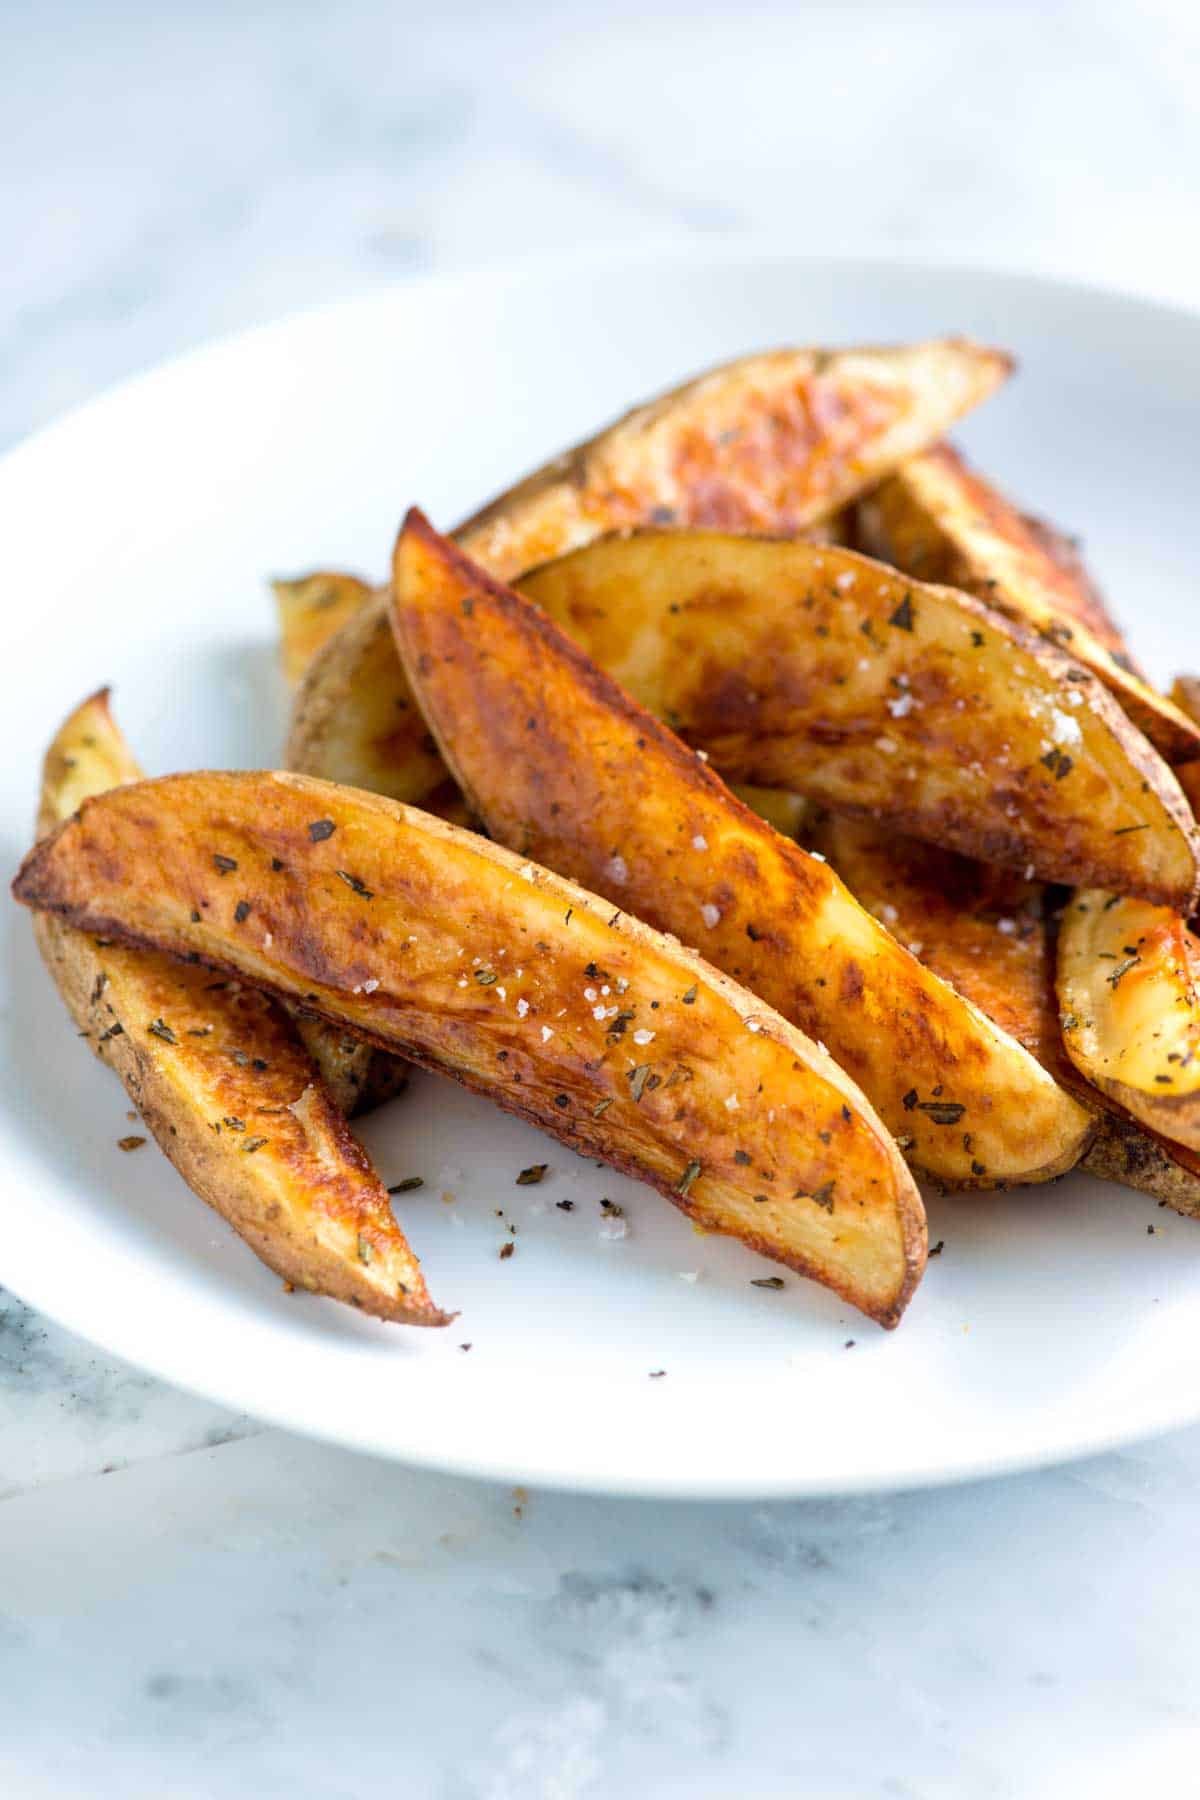 How To Make Potato Wedges So They Don't Stick